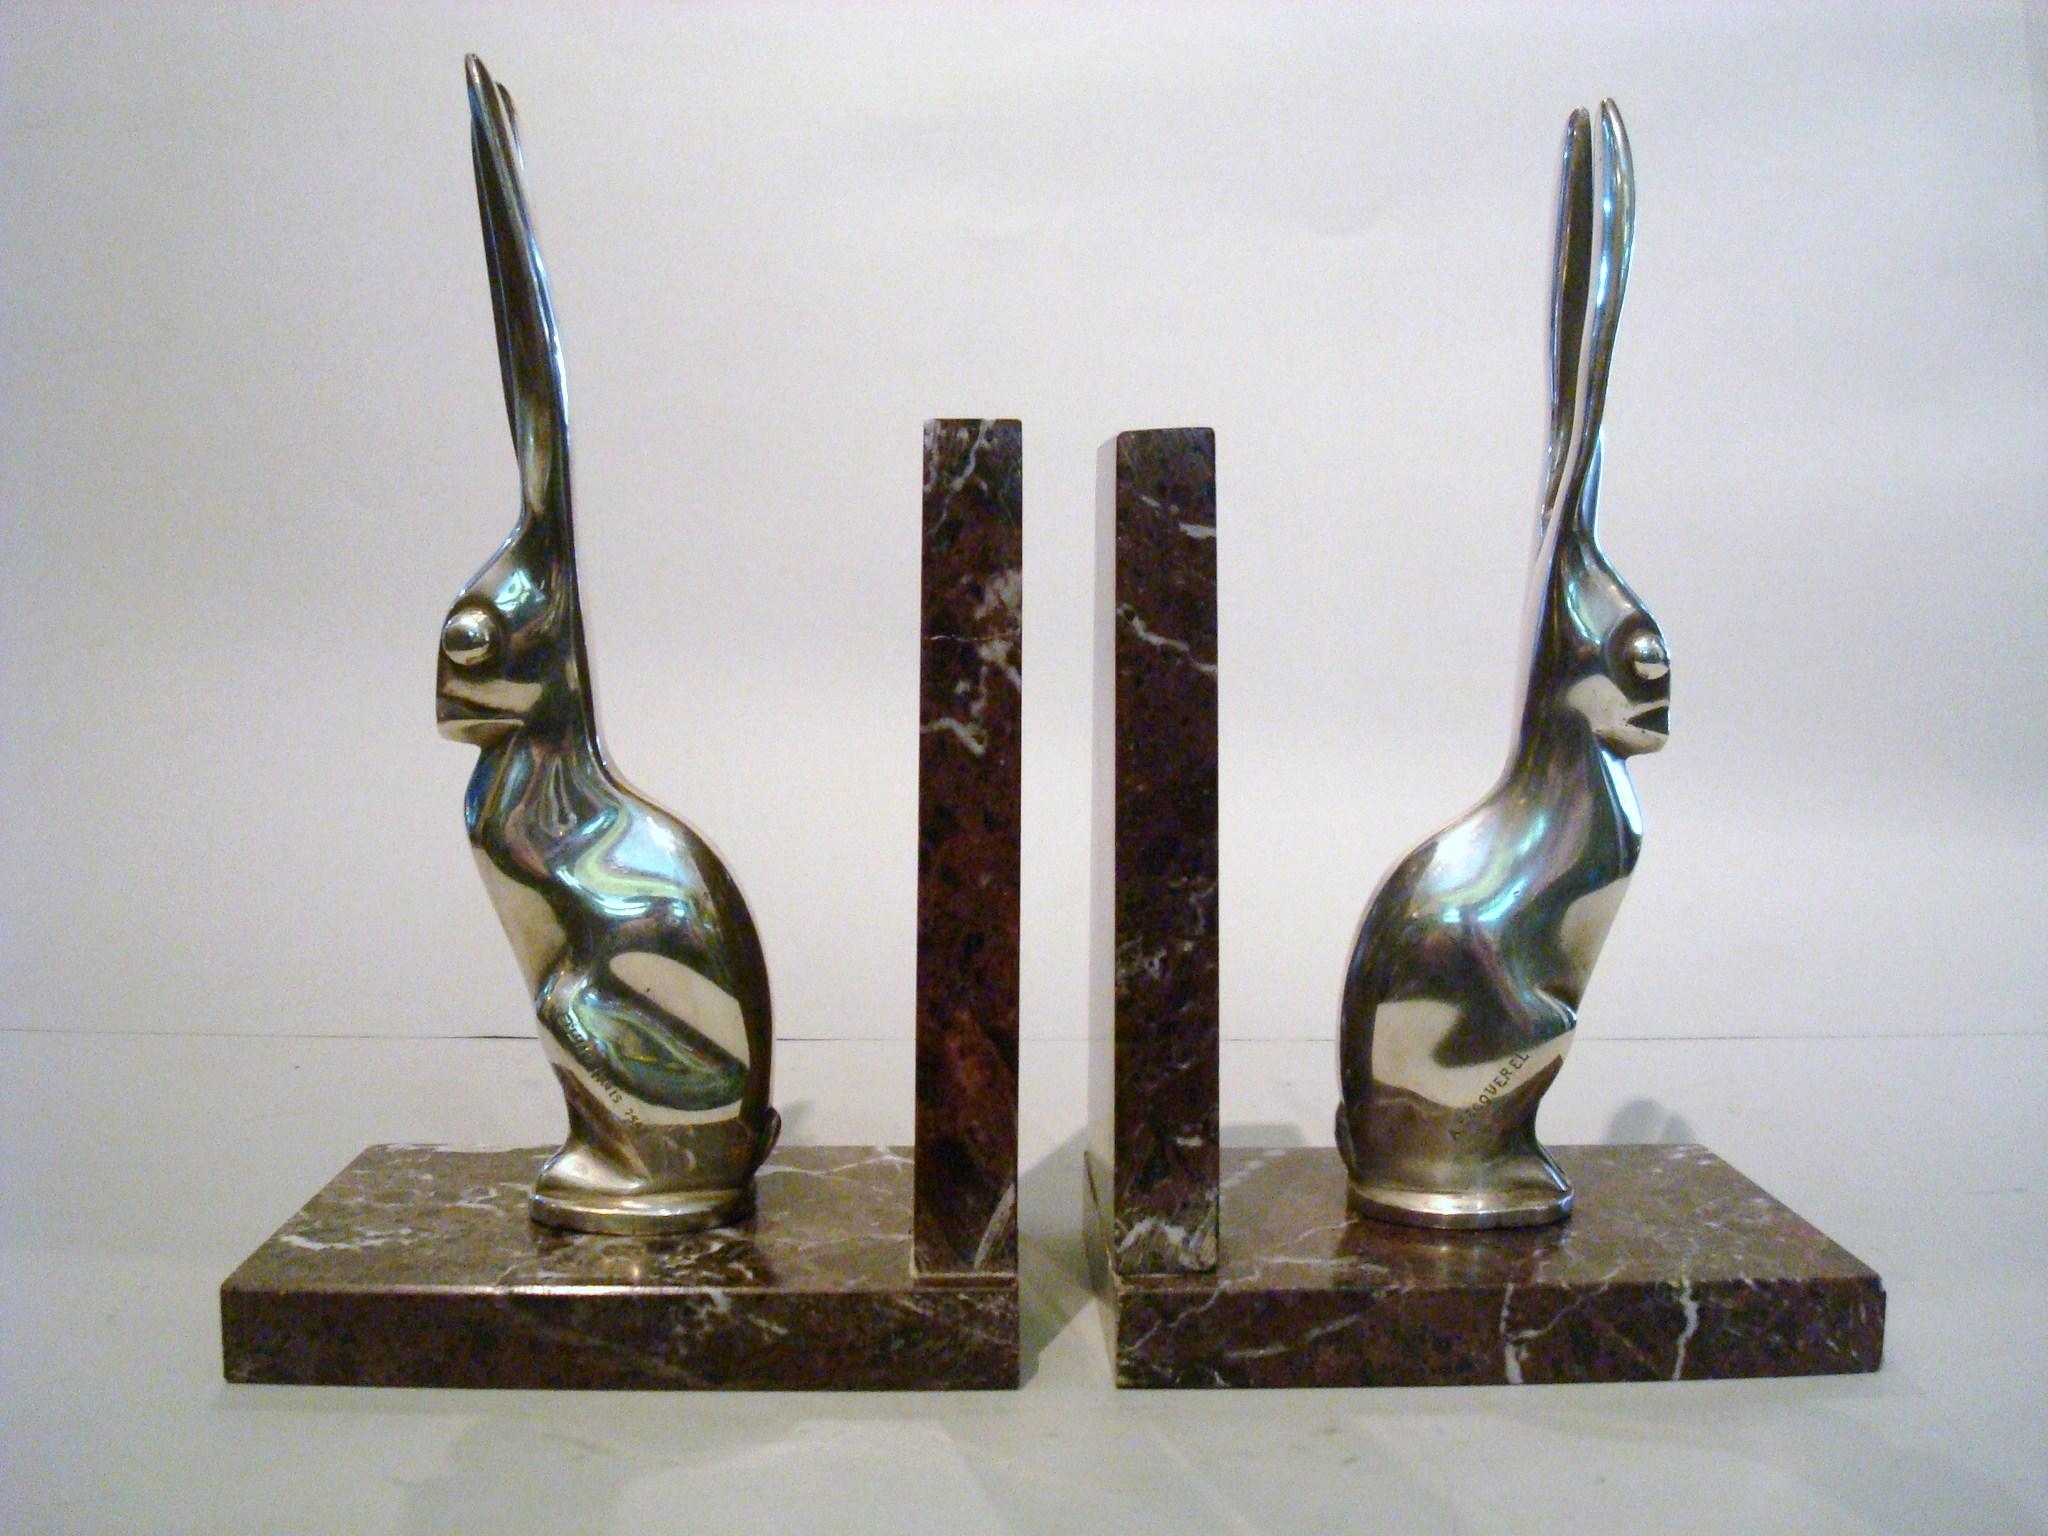 Art Deco hare or rabbit bookends designed by A. Becquerel and signed by foundry Etling Paris.
1920s. Very nice animal sculptures.
 